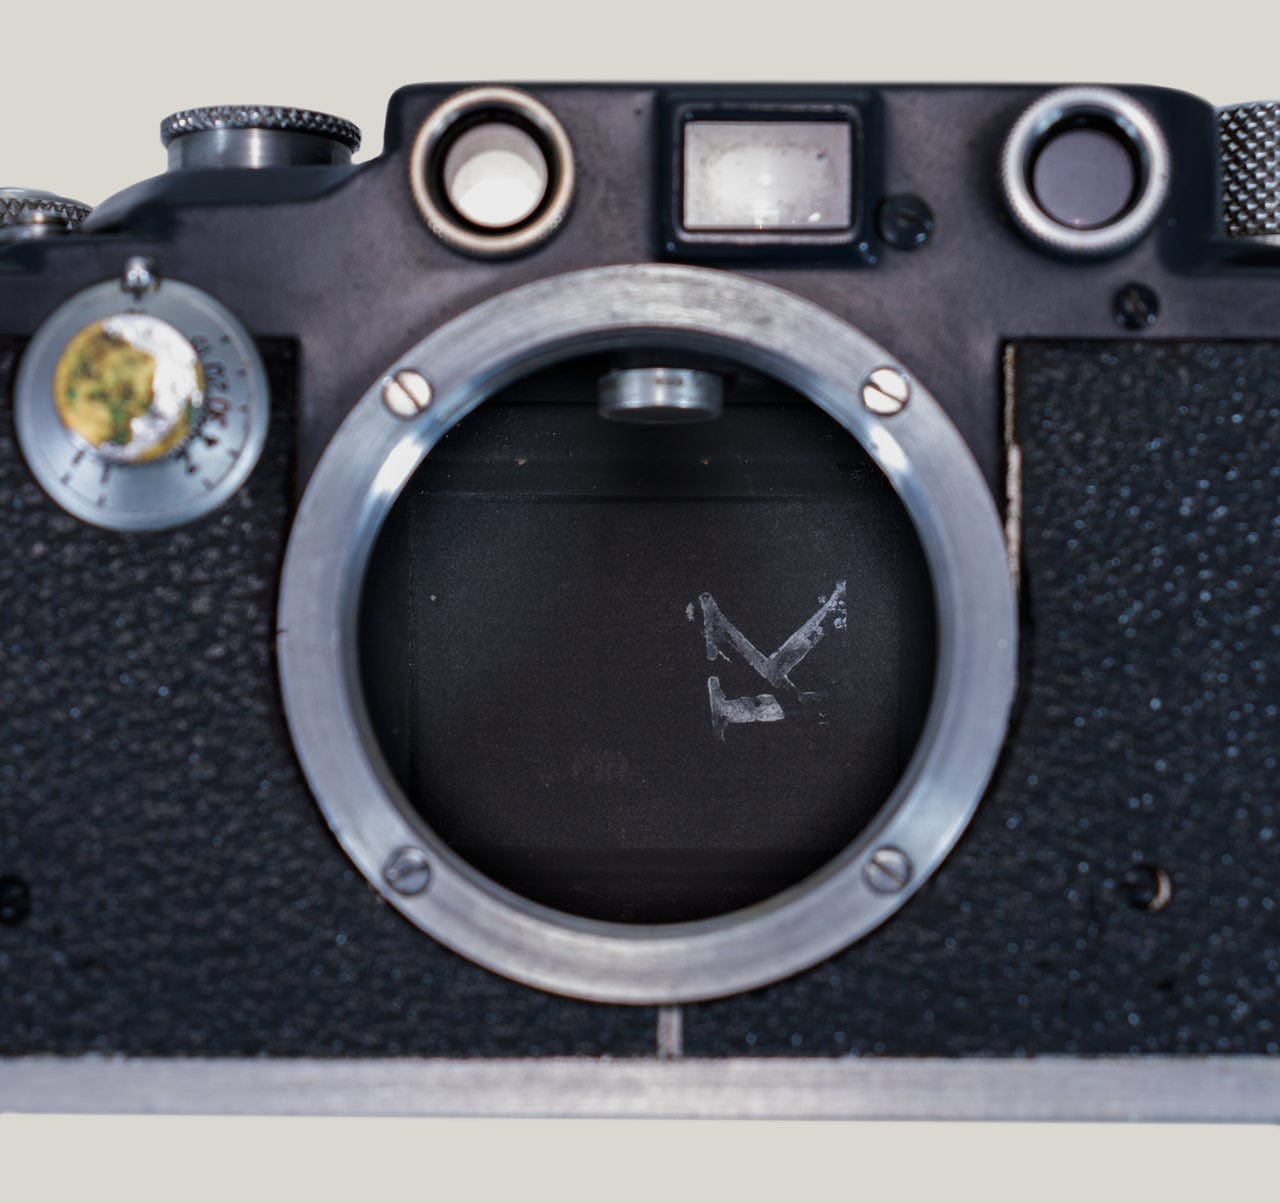 Luftwaffe Leica Camera from WWII – Gold & Silver Pawn Shop